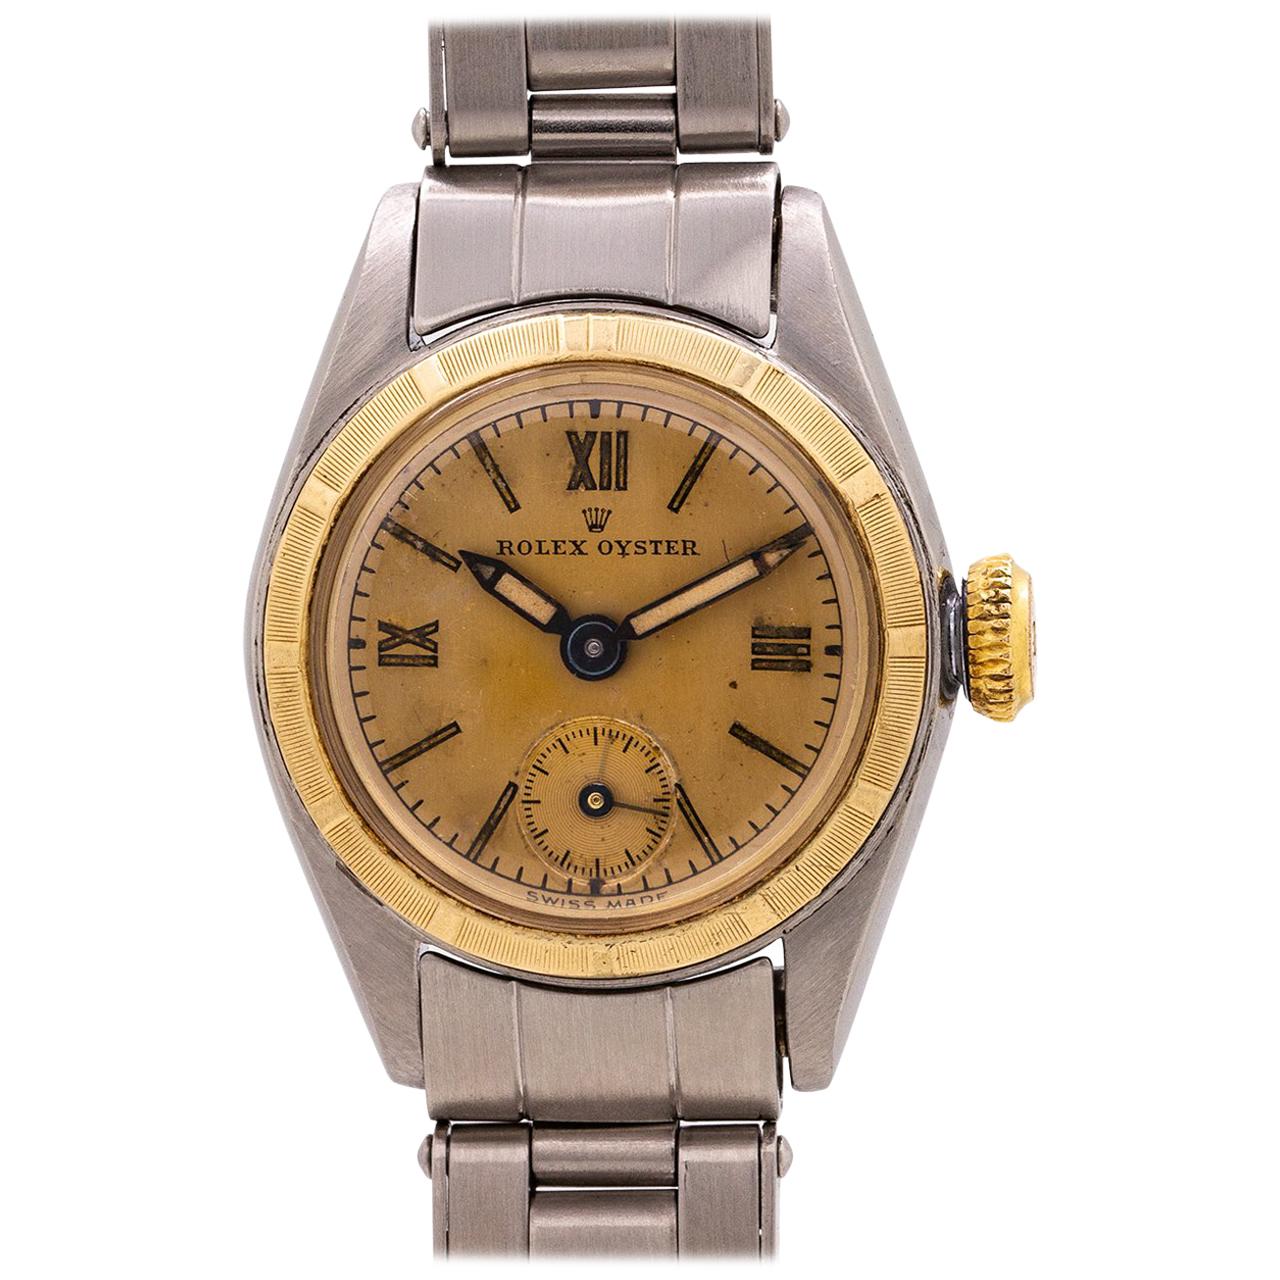 Lady Rolex Oyster 14 Karat Yellow Gold and Stainless Steel Manual Wind